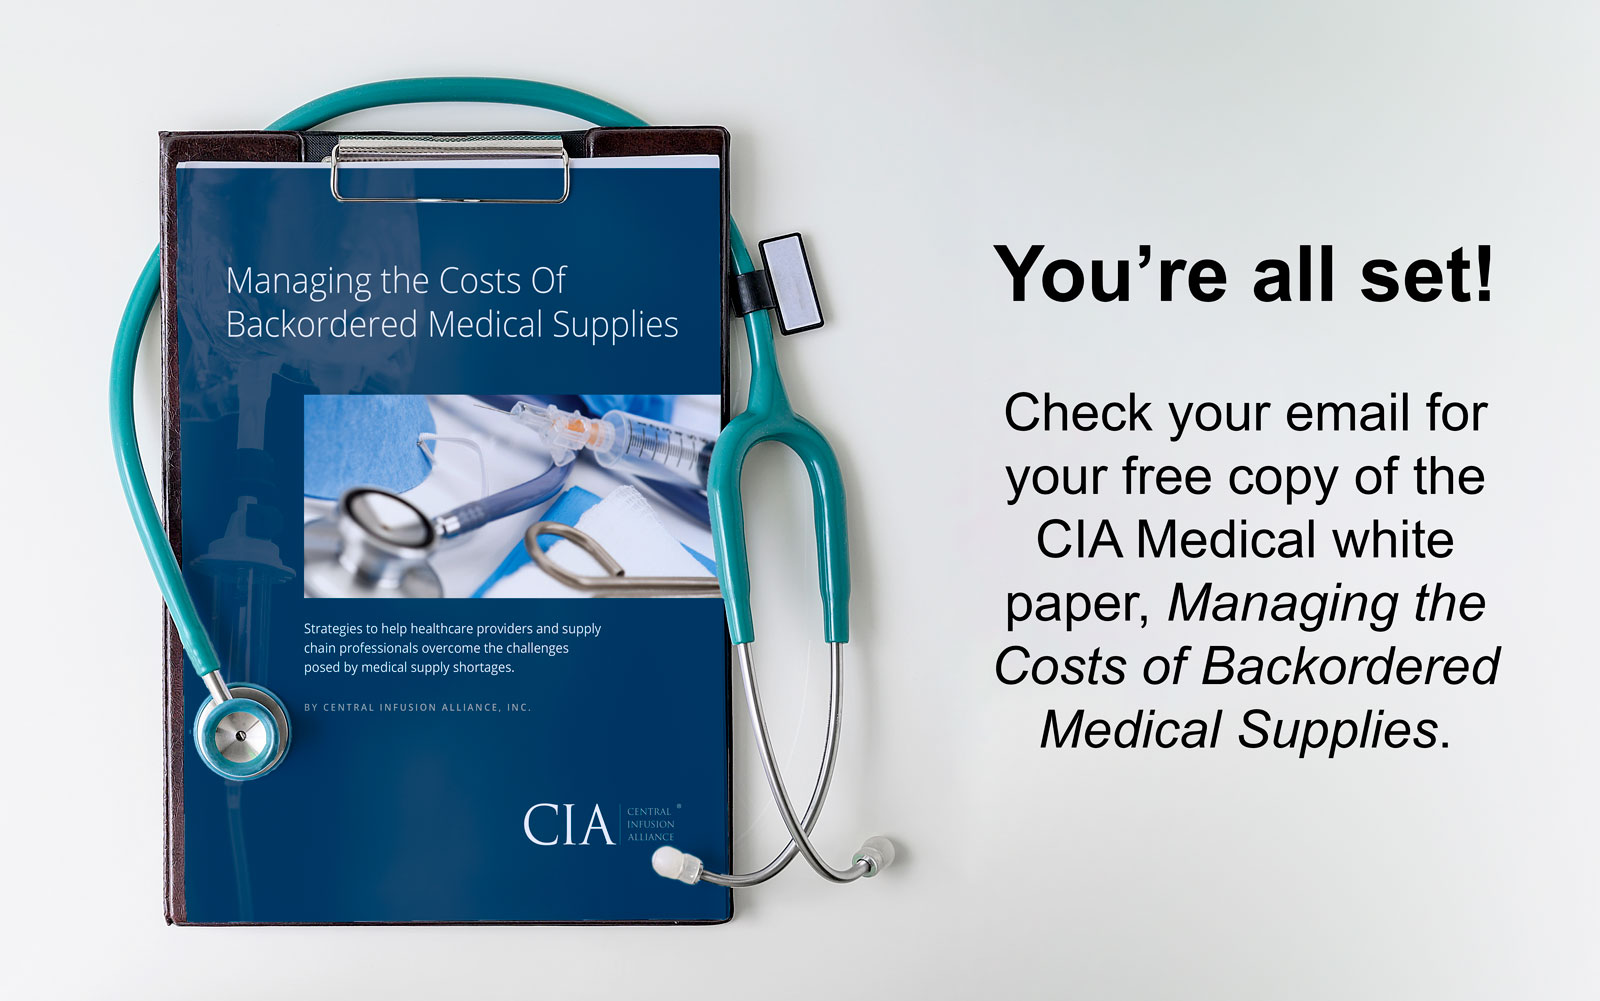 CIA Medical White paper confirmation